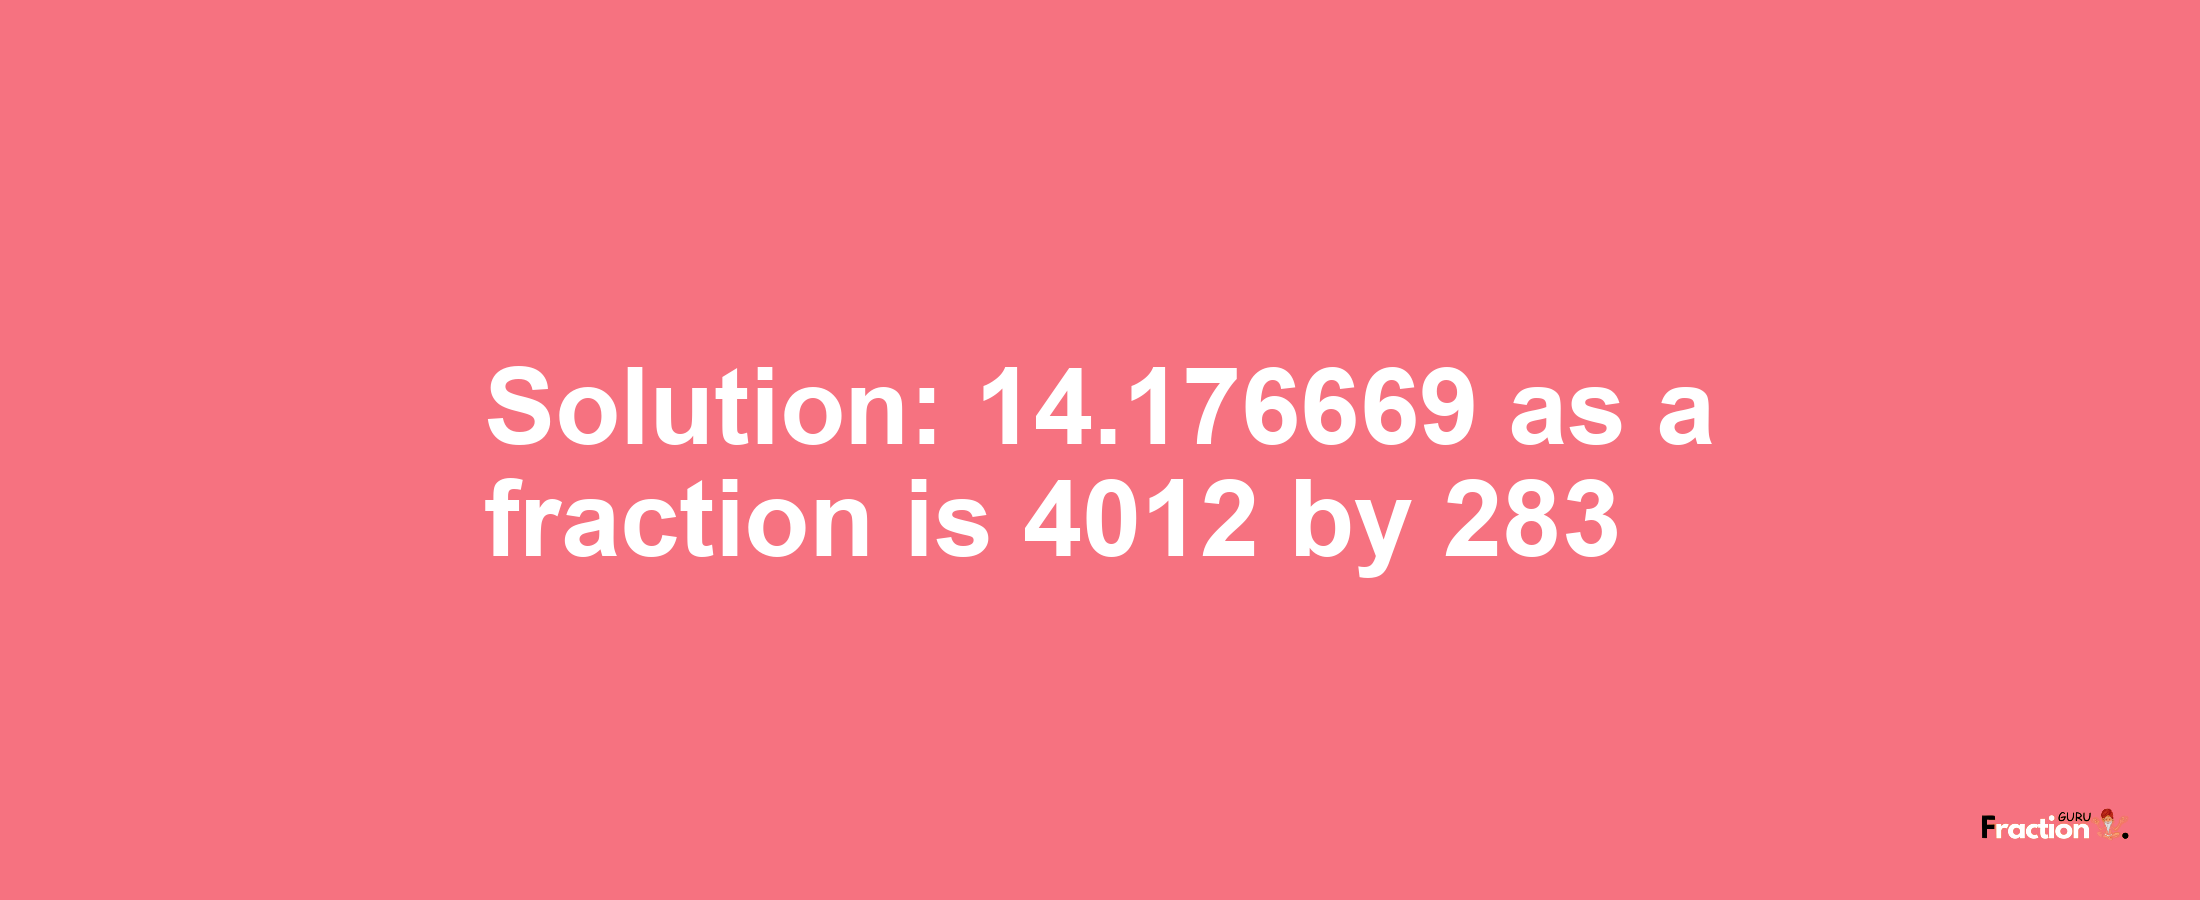 Solution:14.176669 as a fraction is 4012/283